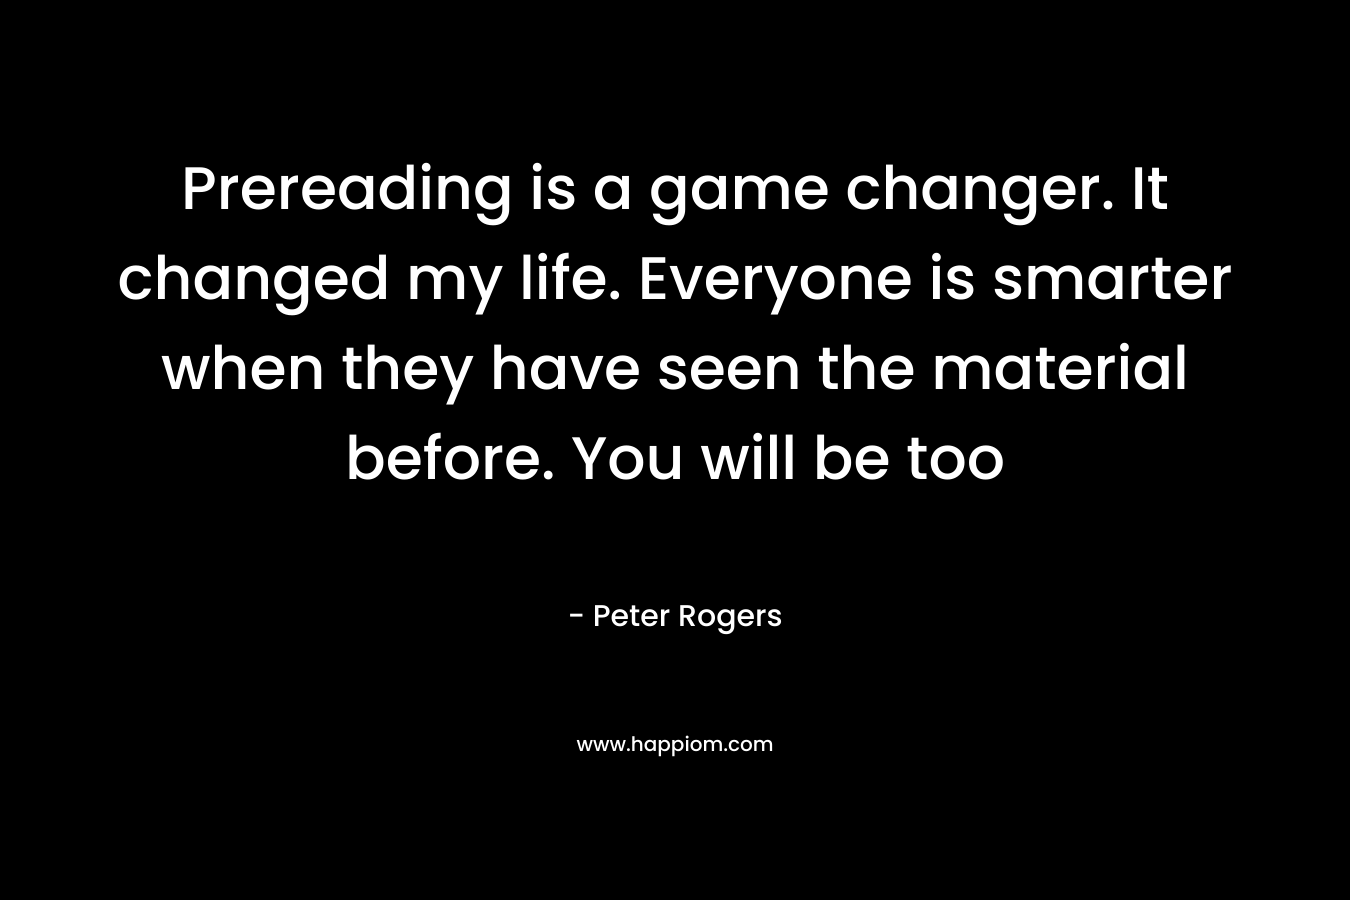 Prereading is a game changer. It changed my life. Everyone is smarter when they have seen the material before. You will be too